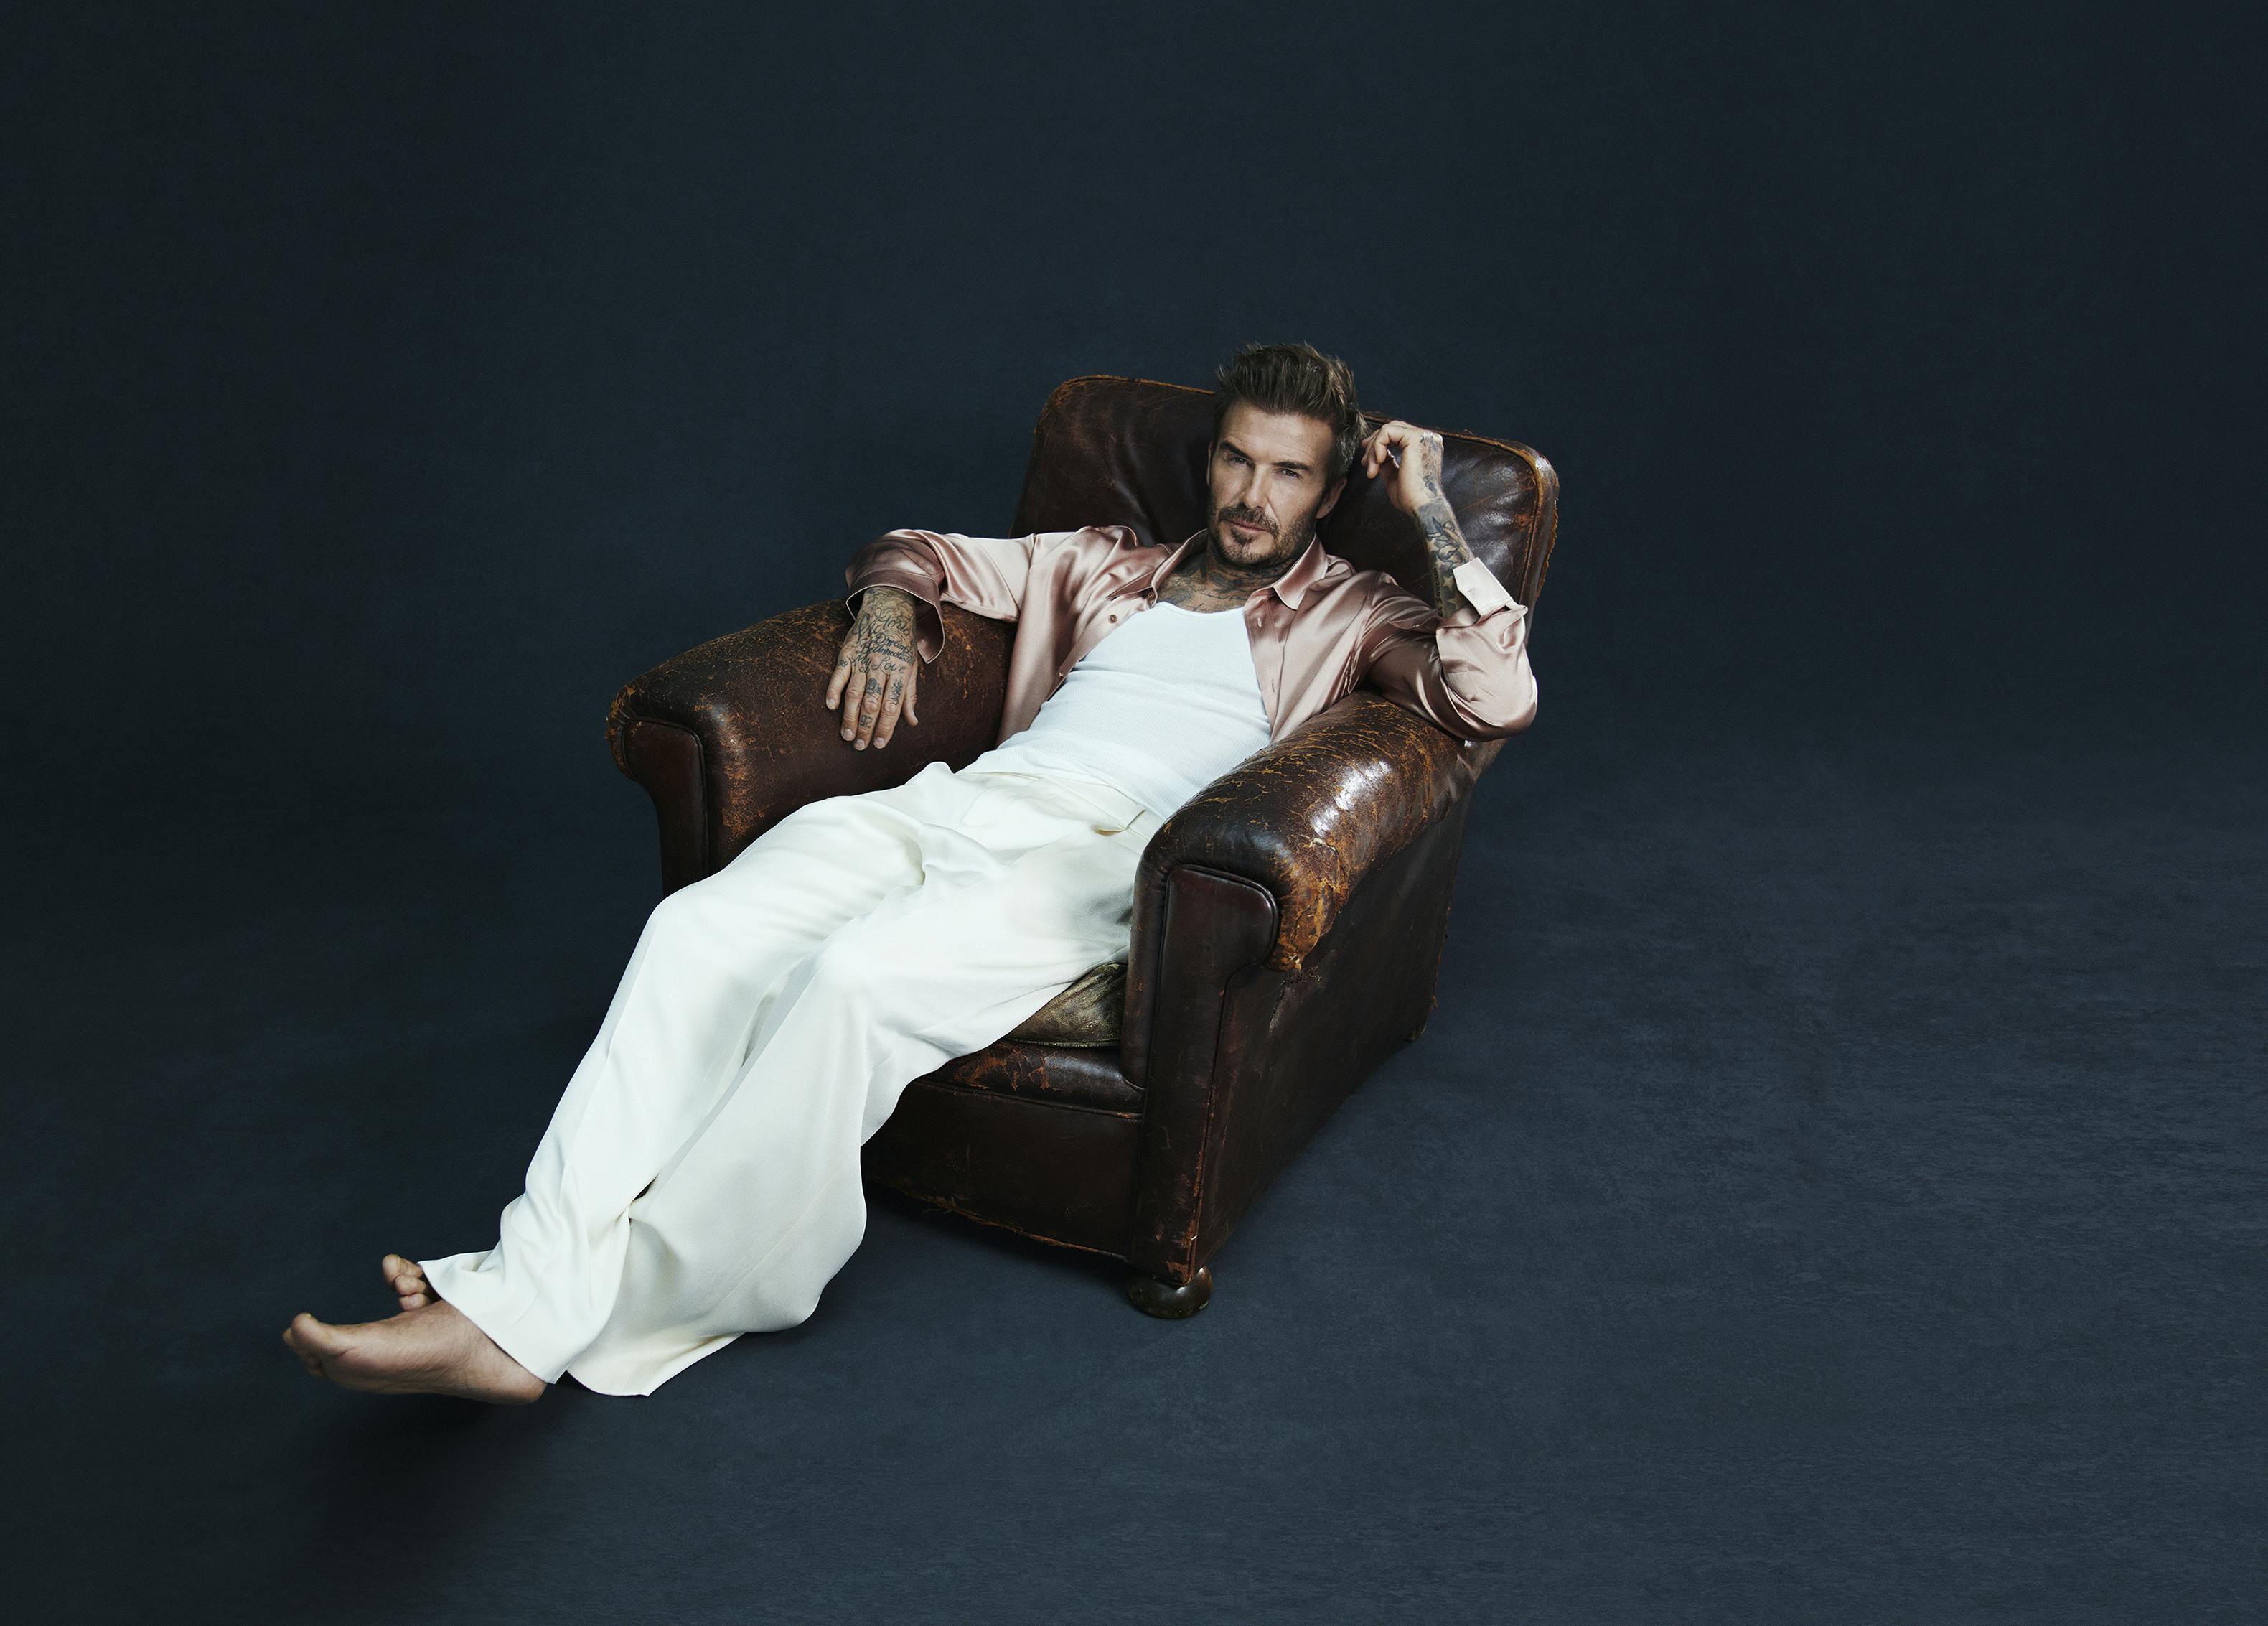 David Beckham wears all white with an open pink silk shirt as he lounges in a brown leather armchair.